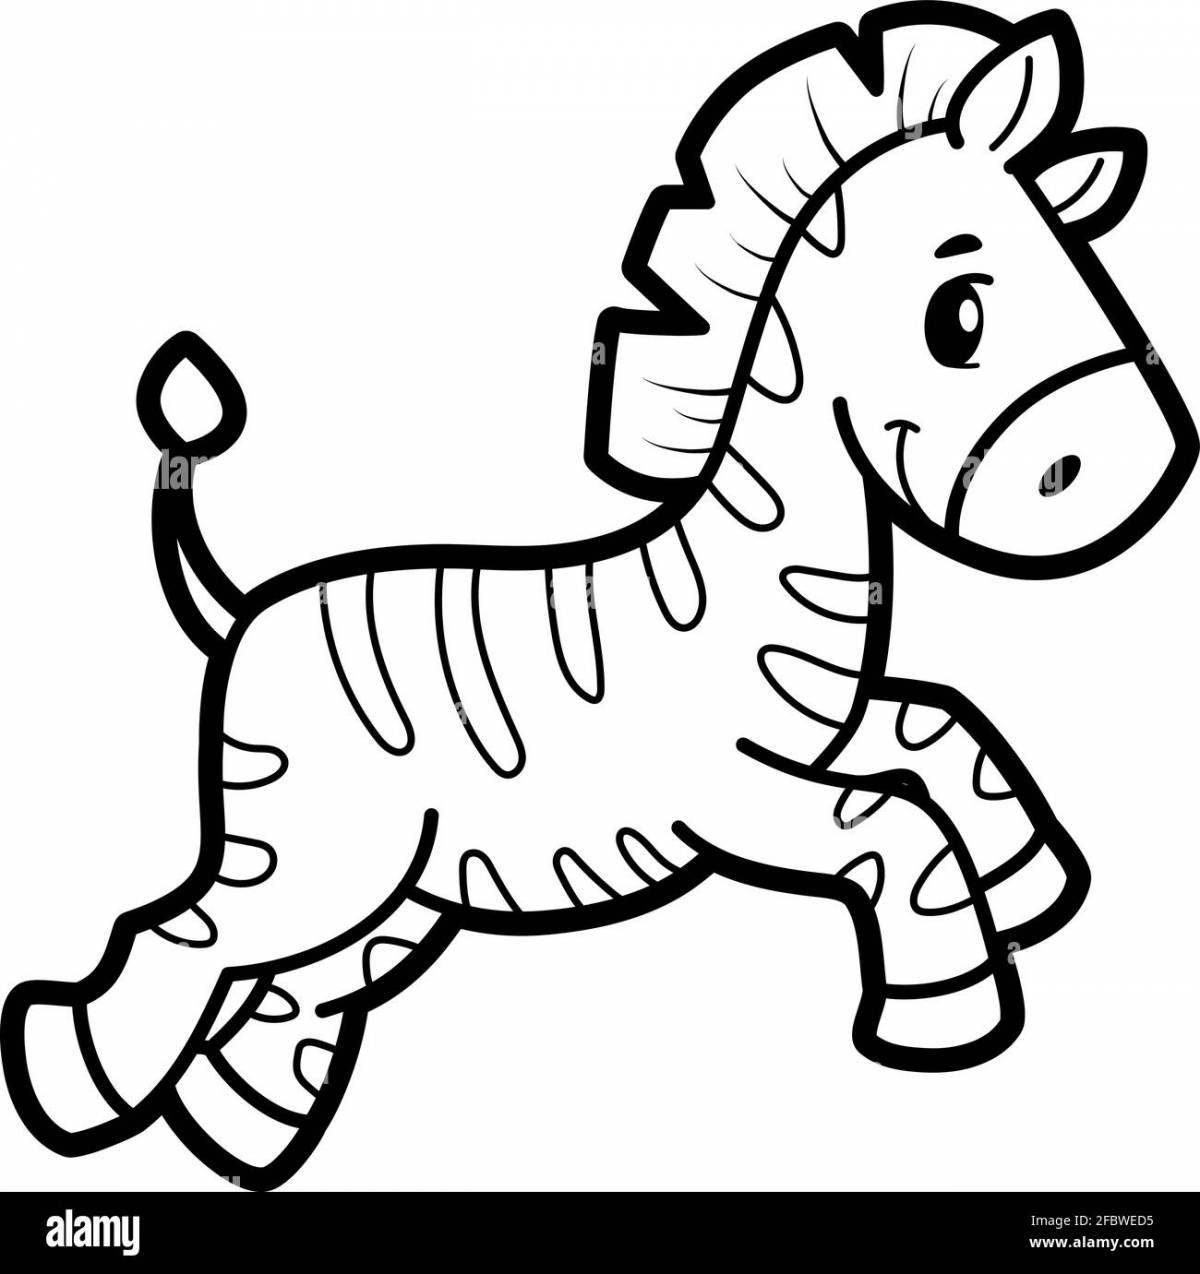 Bright zebra coloring book for 3-4 year olds